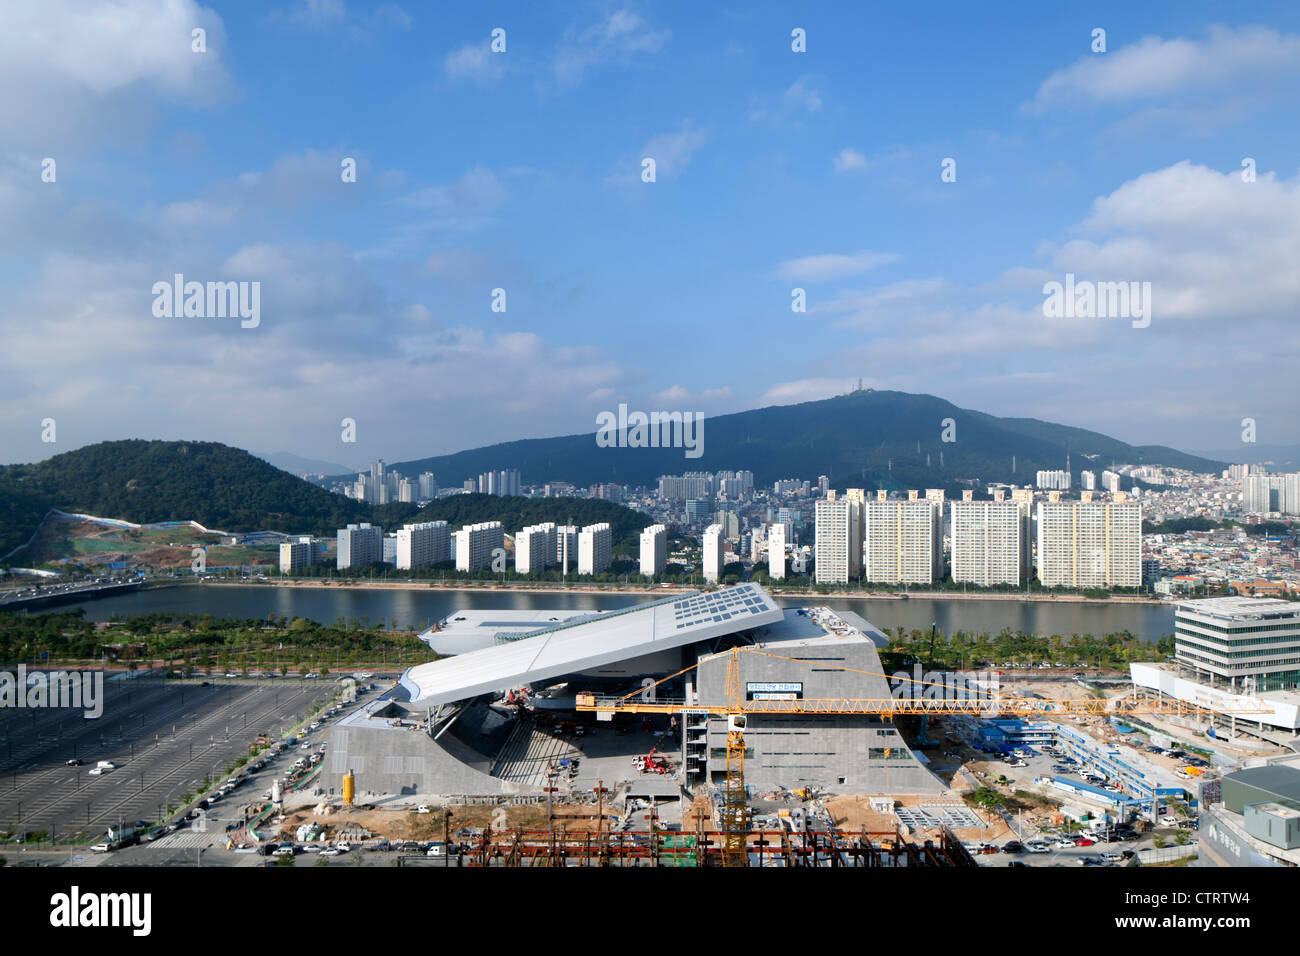 Coop Himmelb(L)Au'S Design For The Busan Cinema Centre And Home Of The Busan International Film Festival (Biff) Provides A New Stock Photo